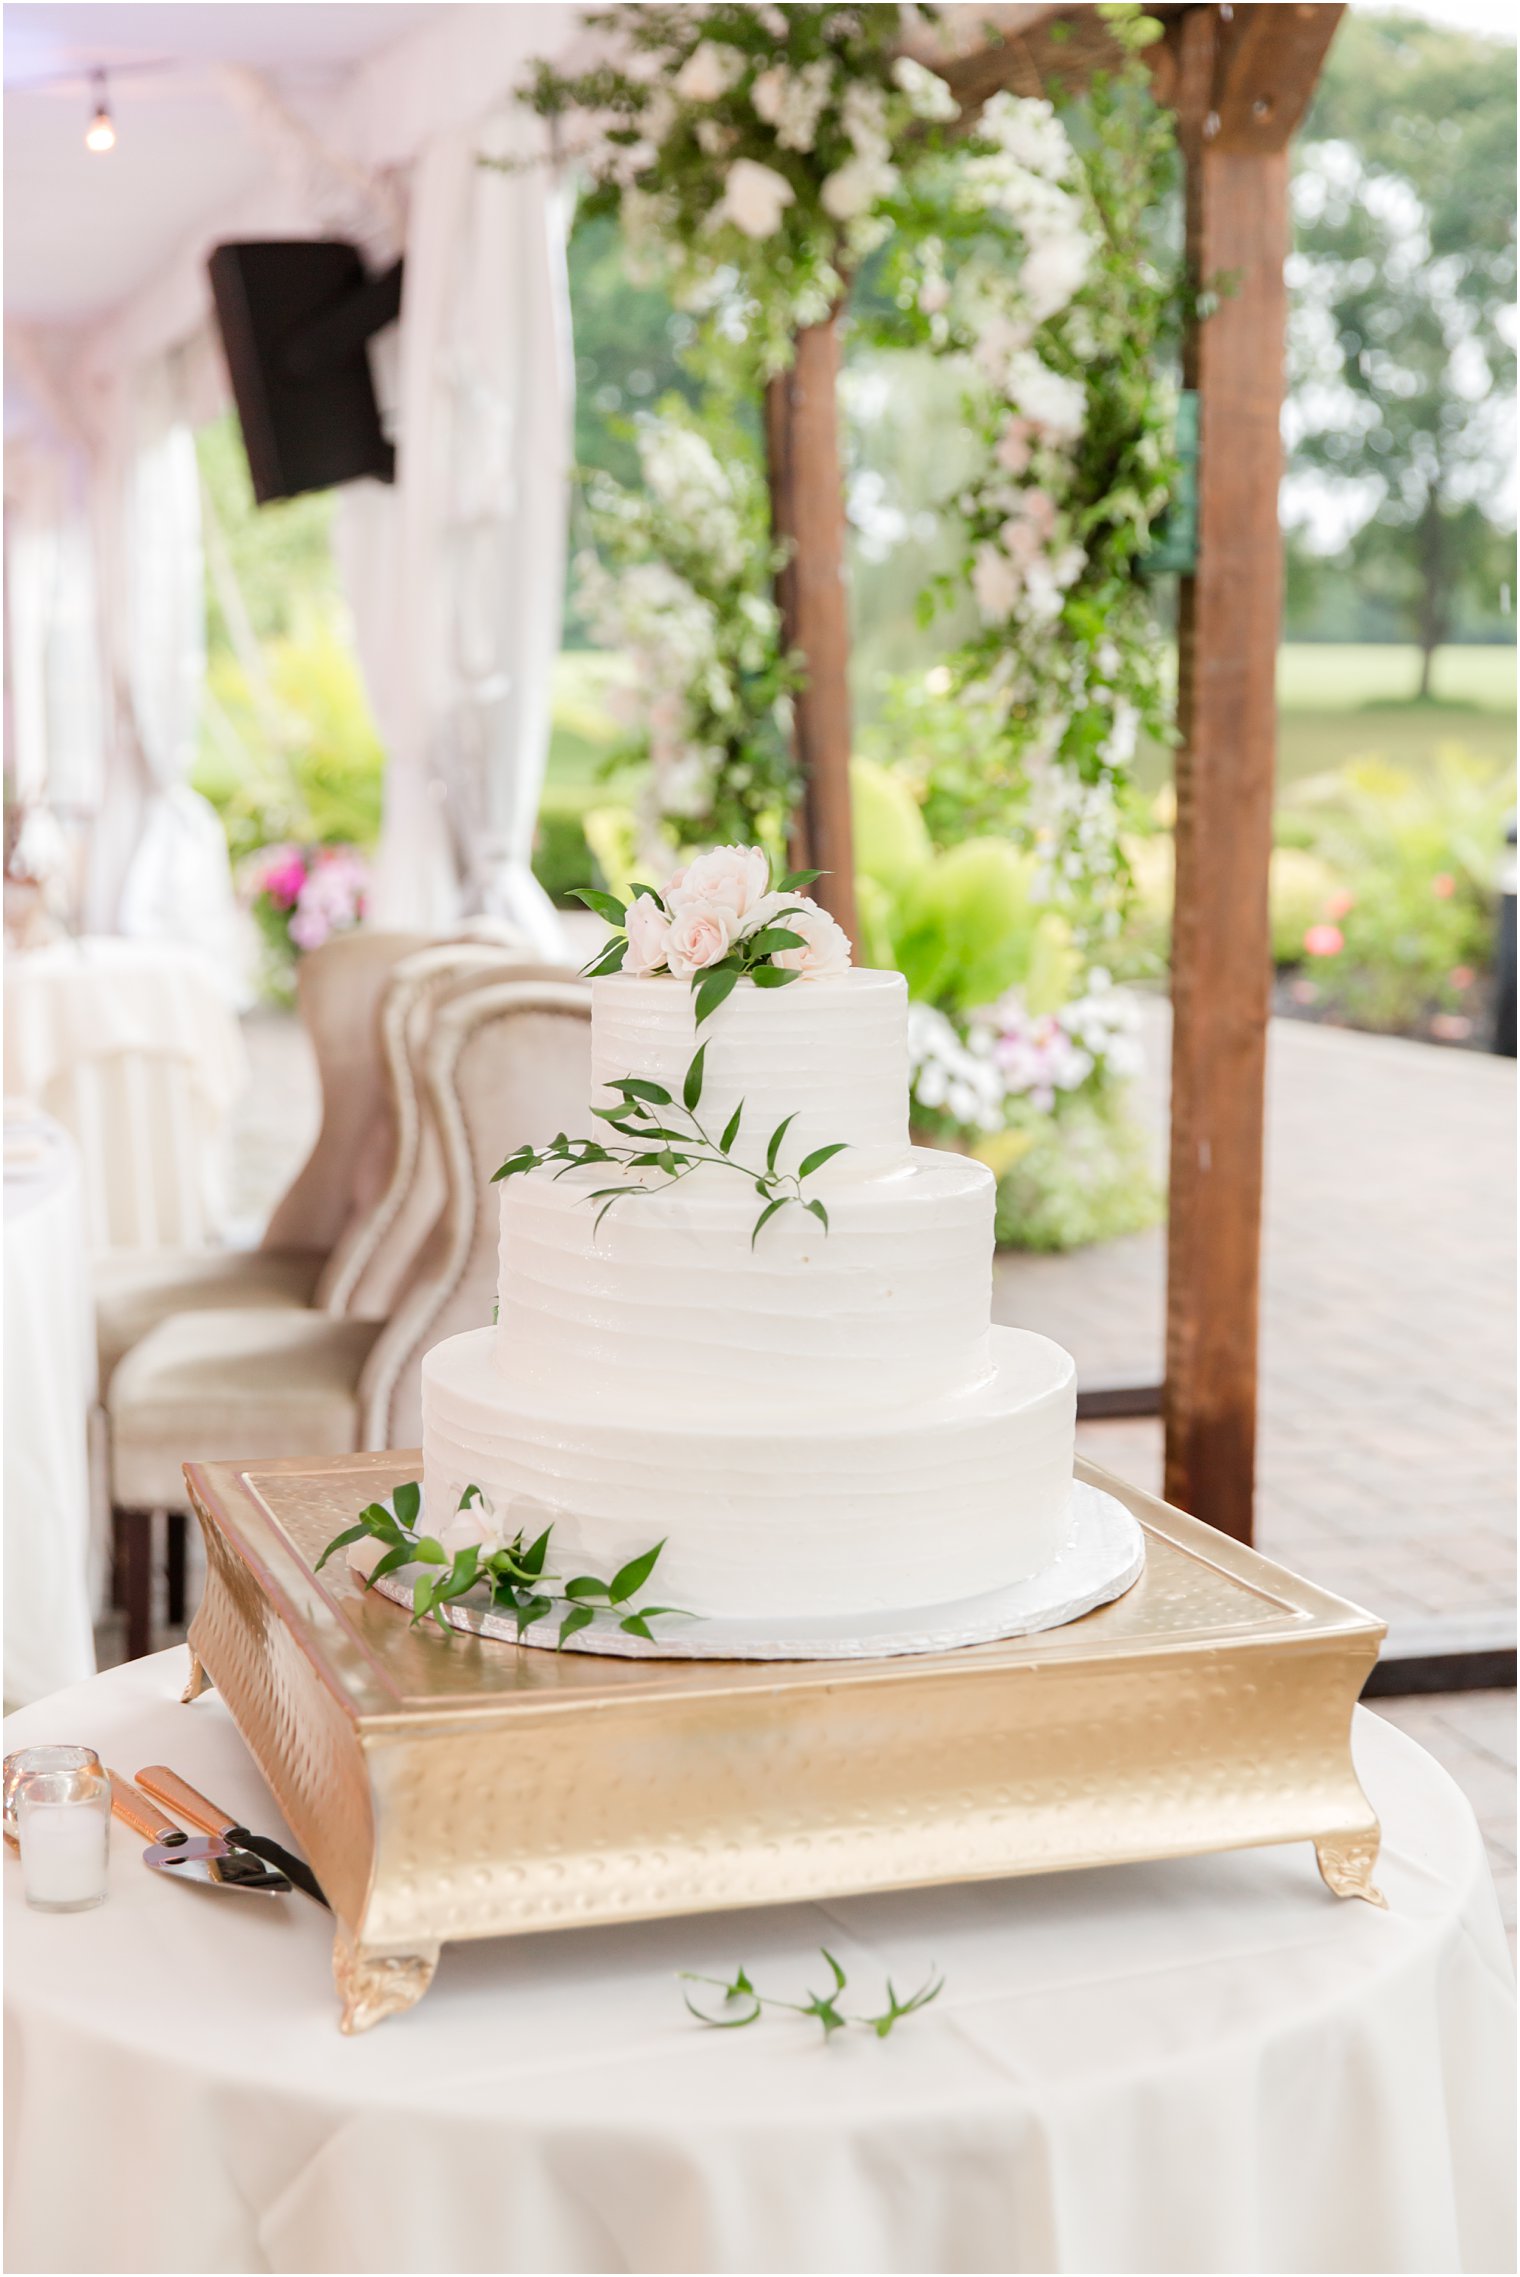 tiered wedding cake sitting on gold tray 